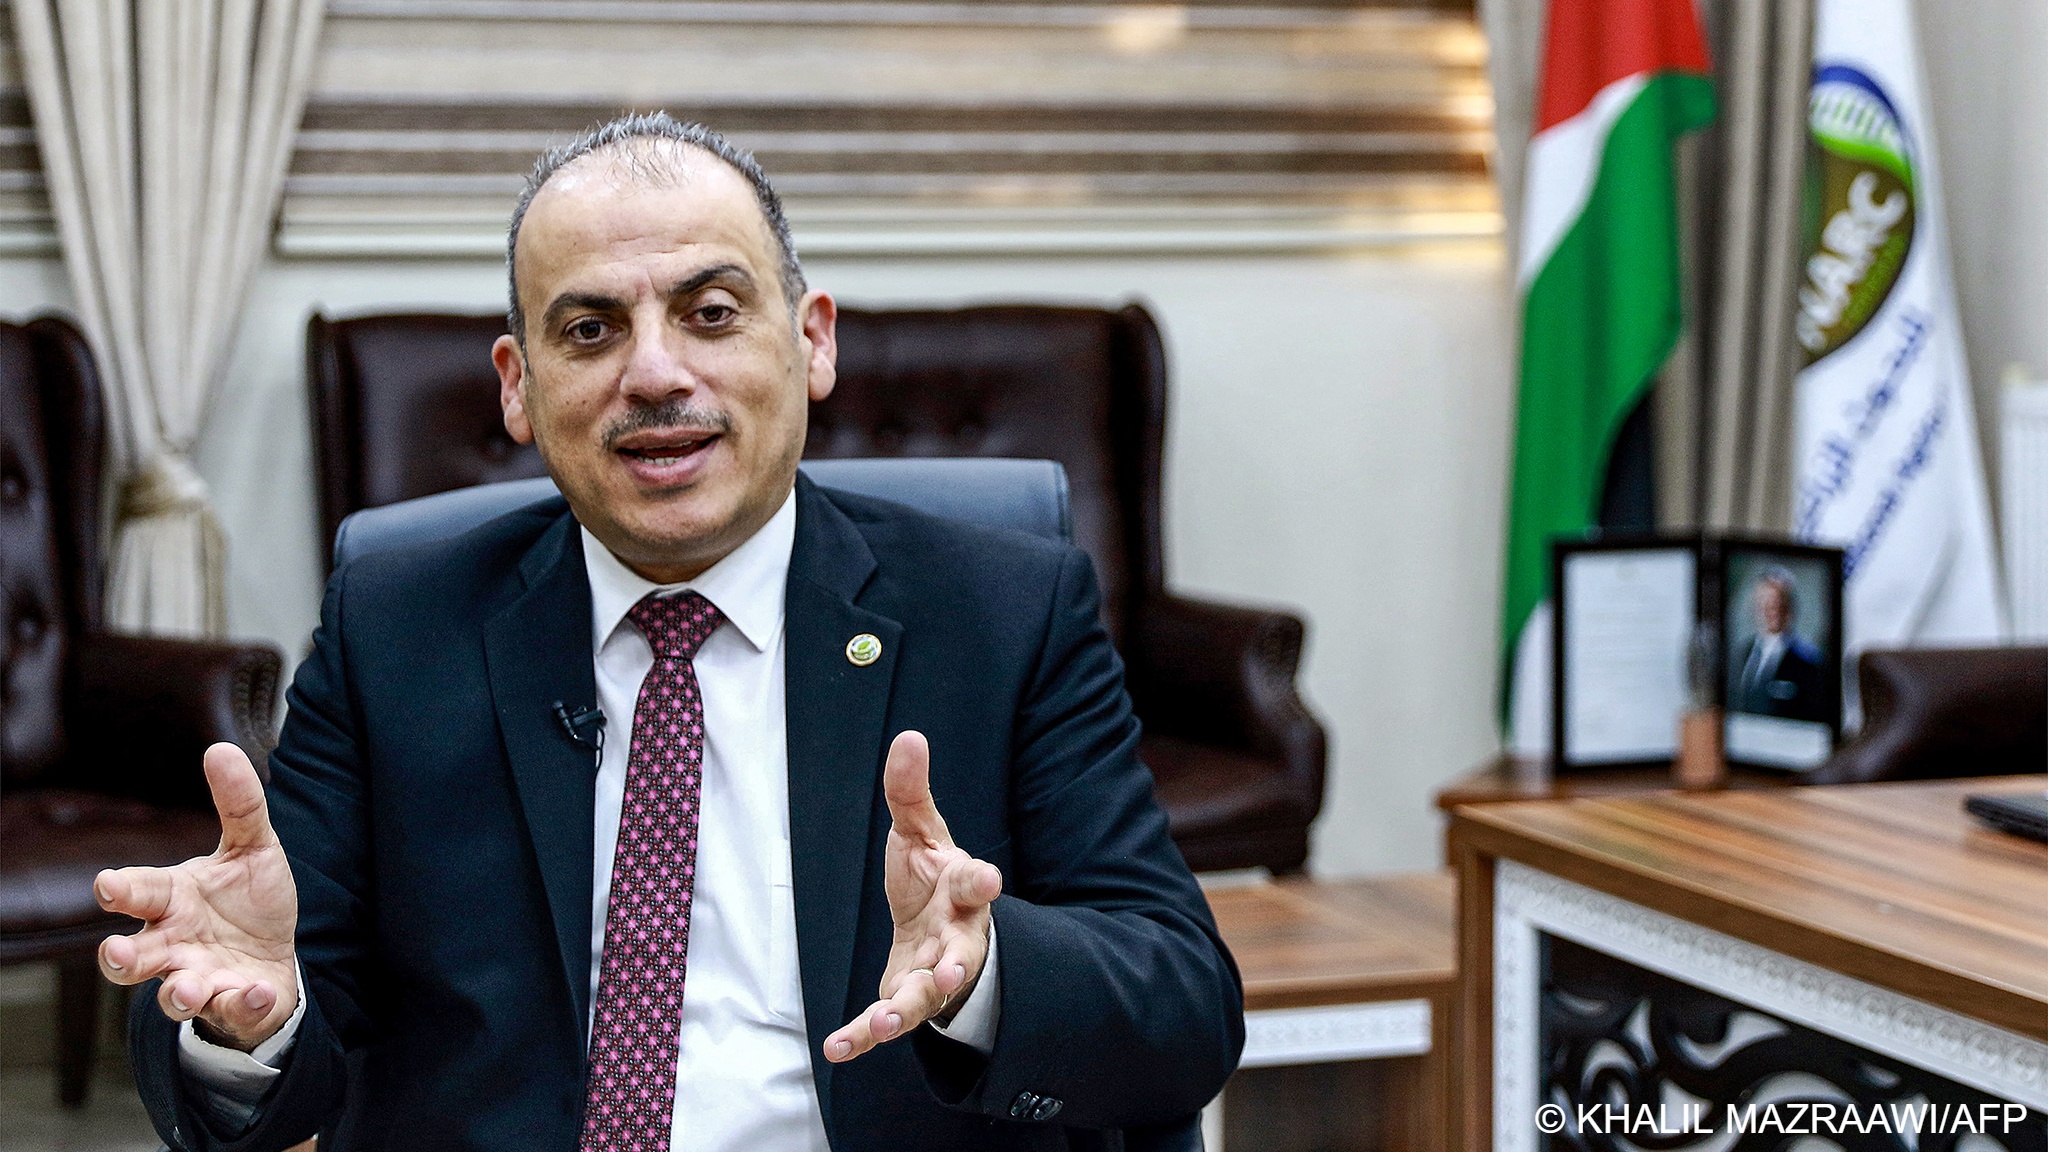 Nizar Haddad, director of the Jordanian National Agricultural Research Center, gestures as he speaks, sitting on a chair with the flags of Jordan and the NARC behind him